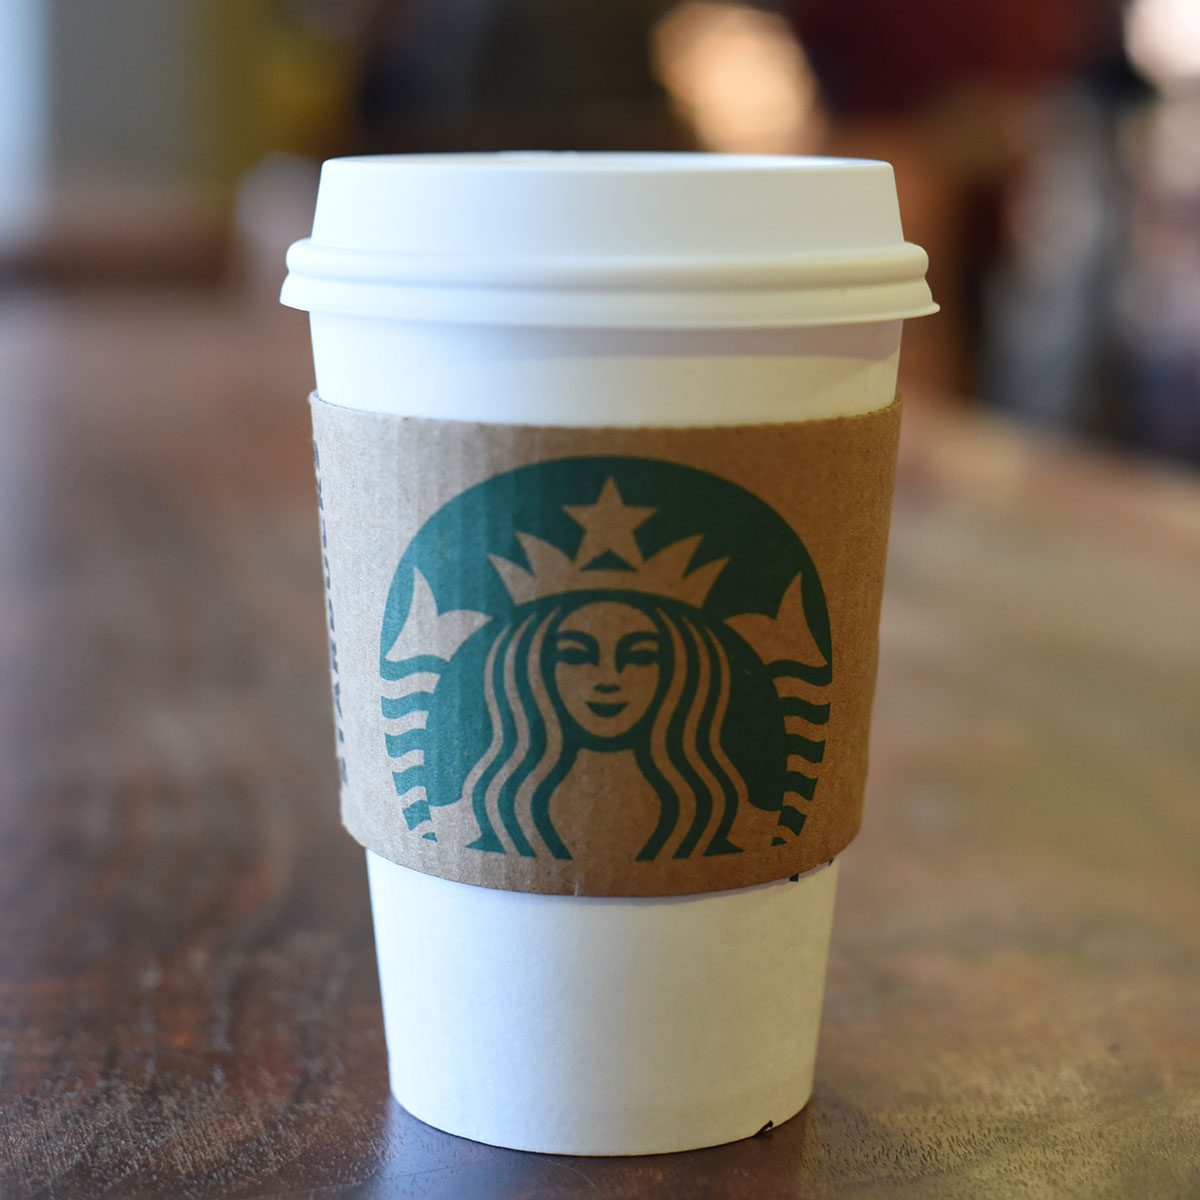 10 Delicious Caffeine-Free Drinks at Starbucks (That Aren't Decaf Coffee)